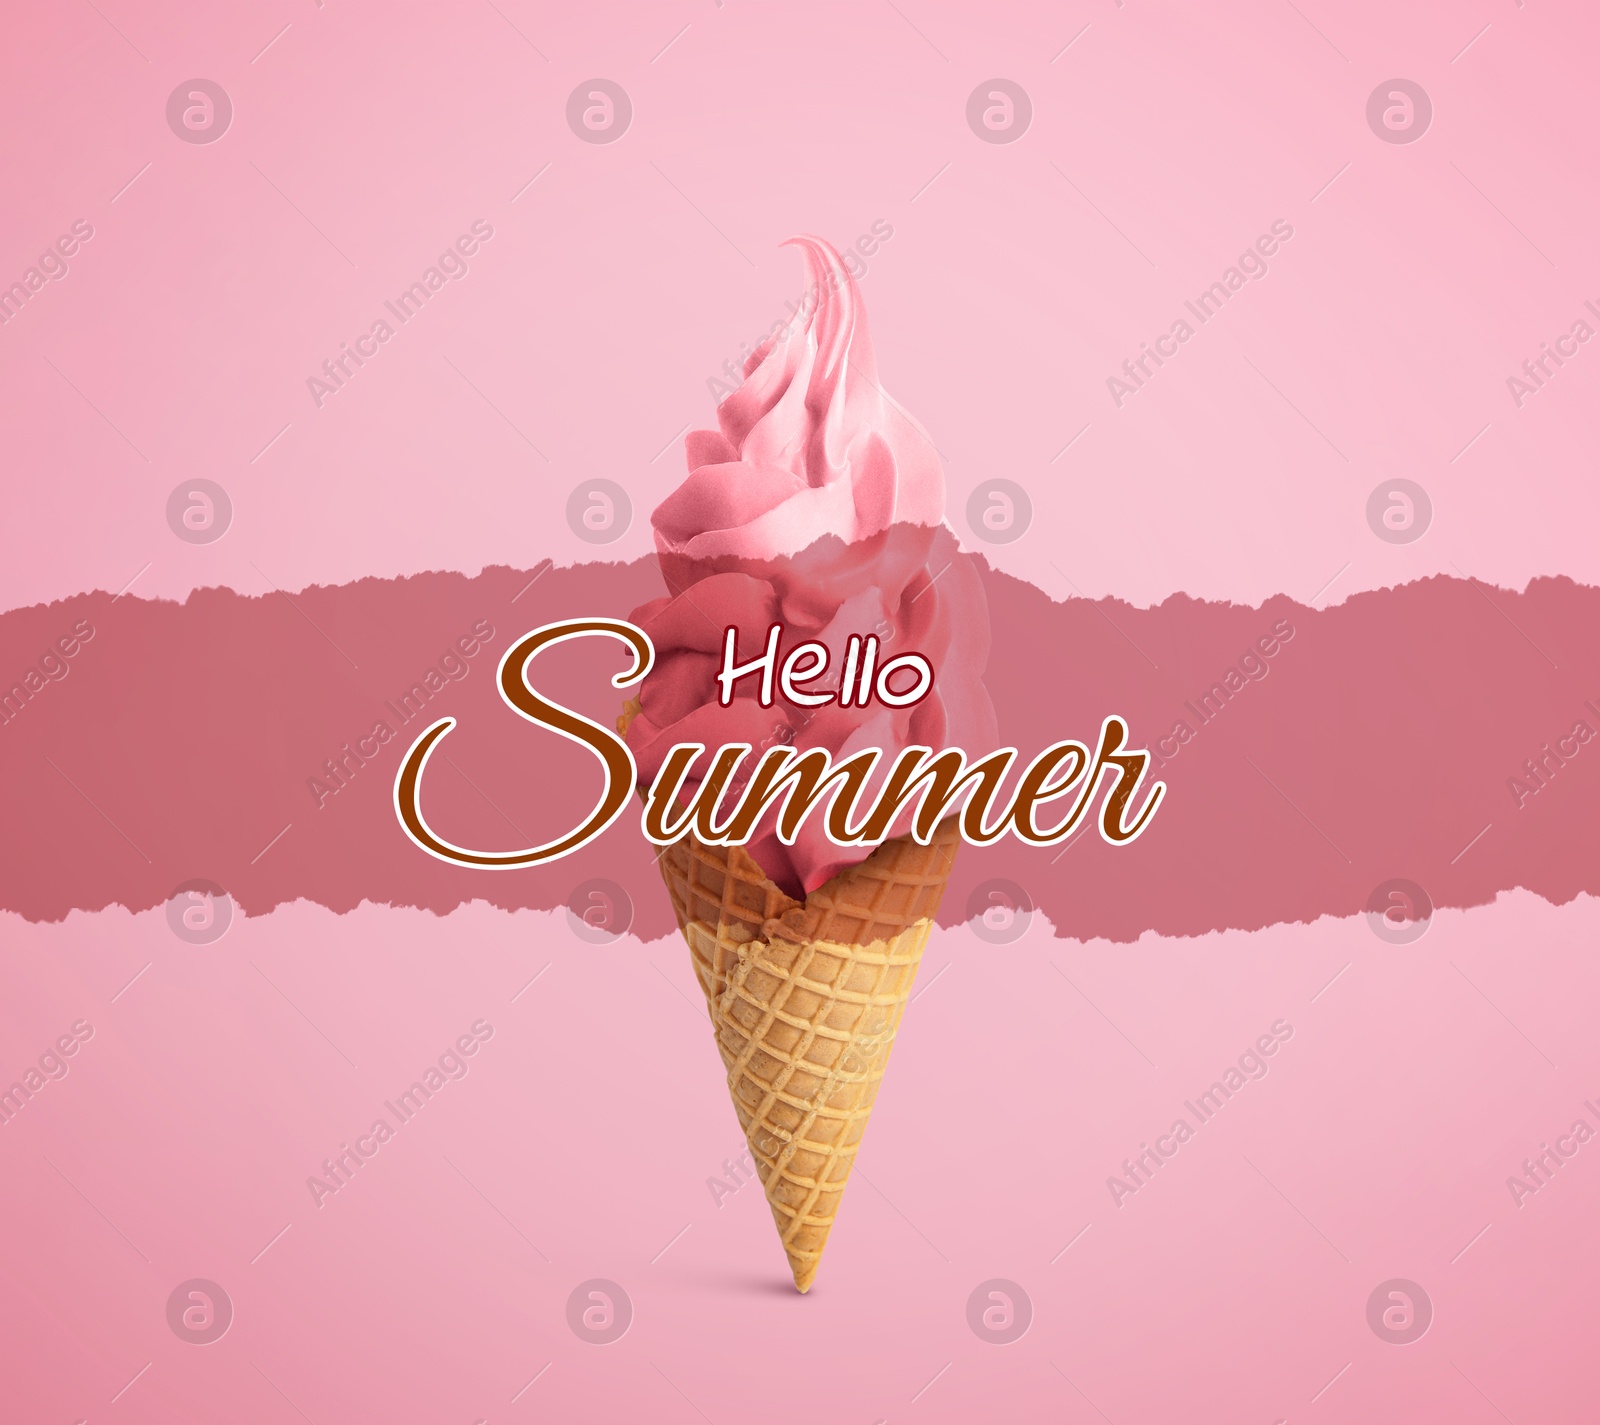 Image of Hello Summer. Tasty ice cream in crispy cone on pink background